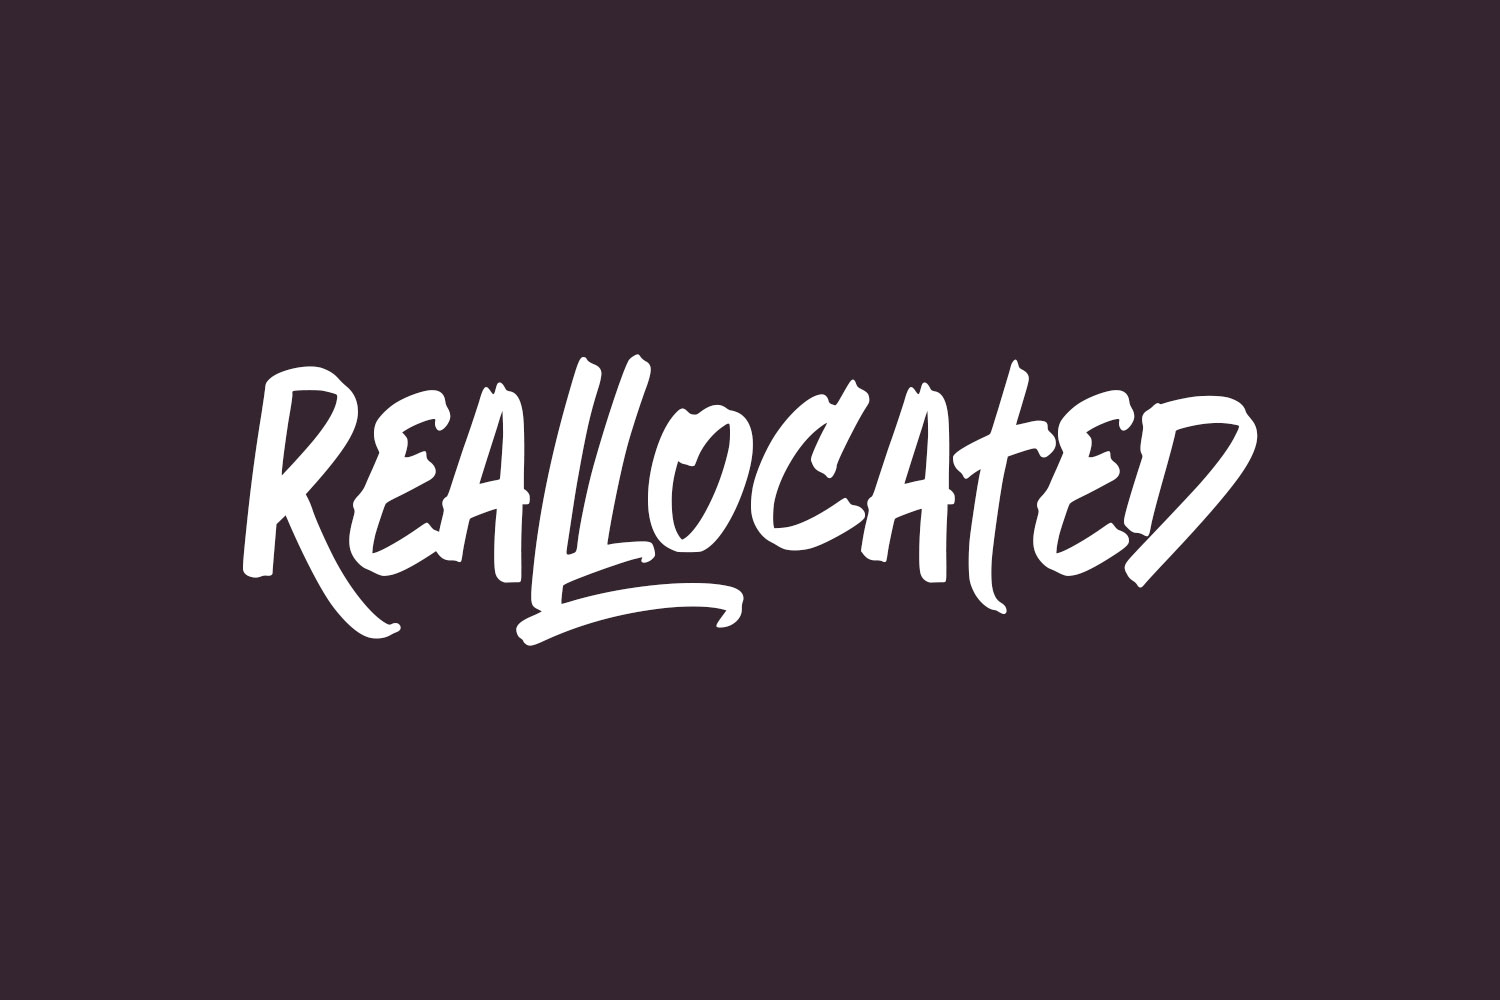 Reallocated Free Font